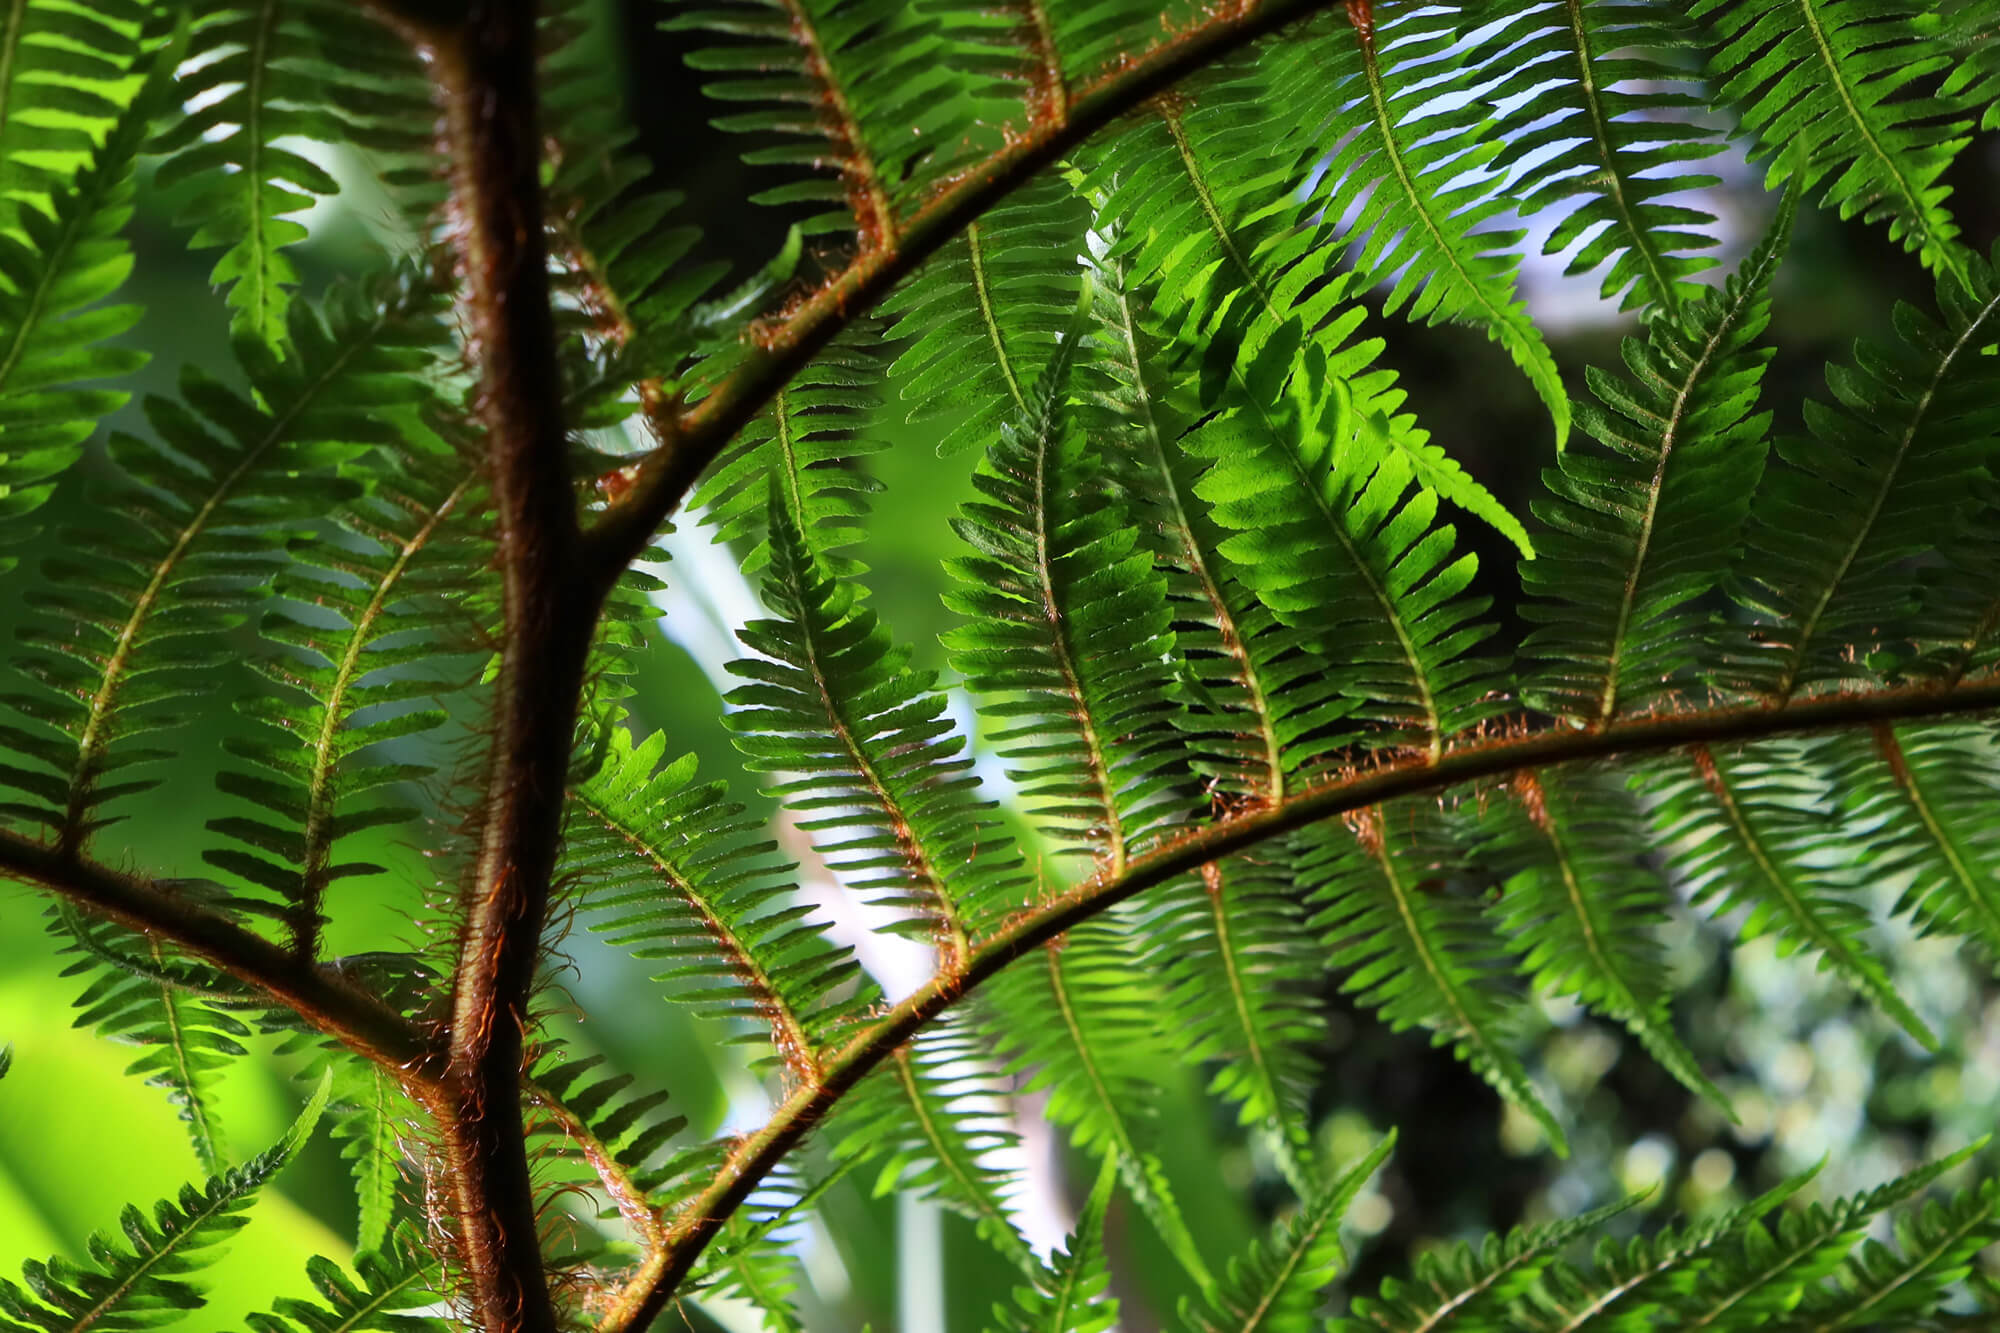 Up-close of fern leaves and stems.